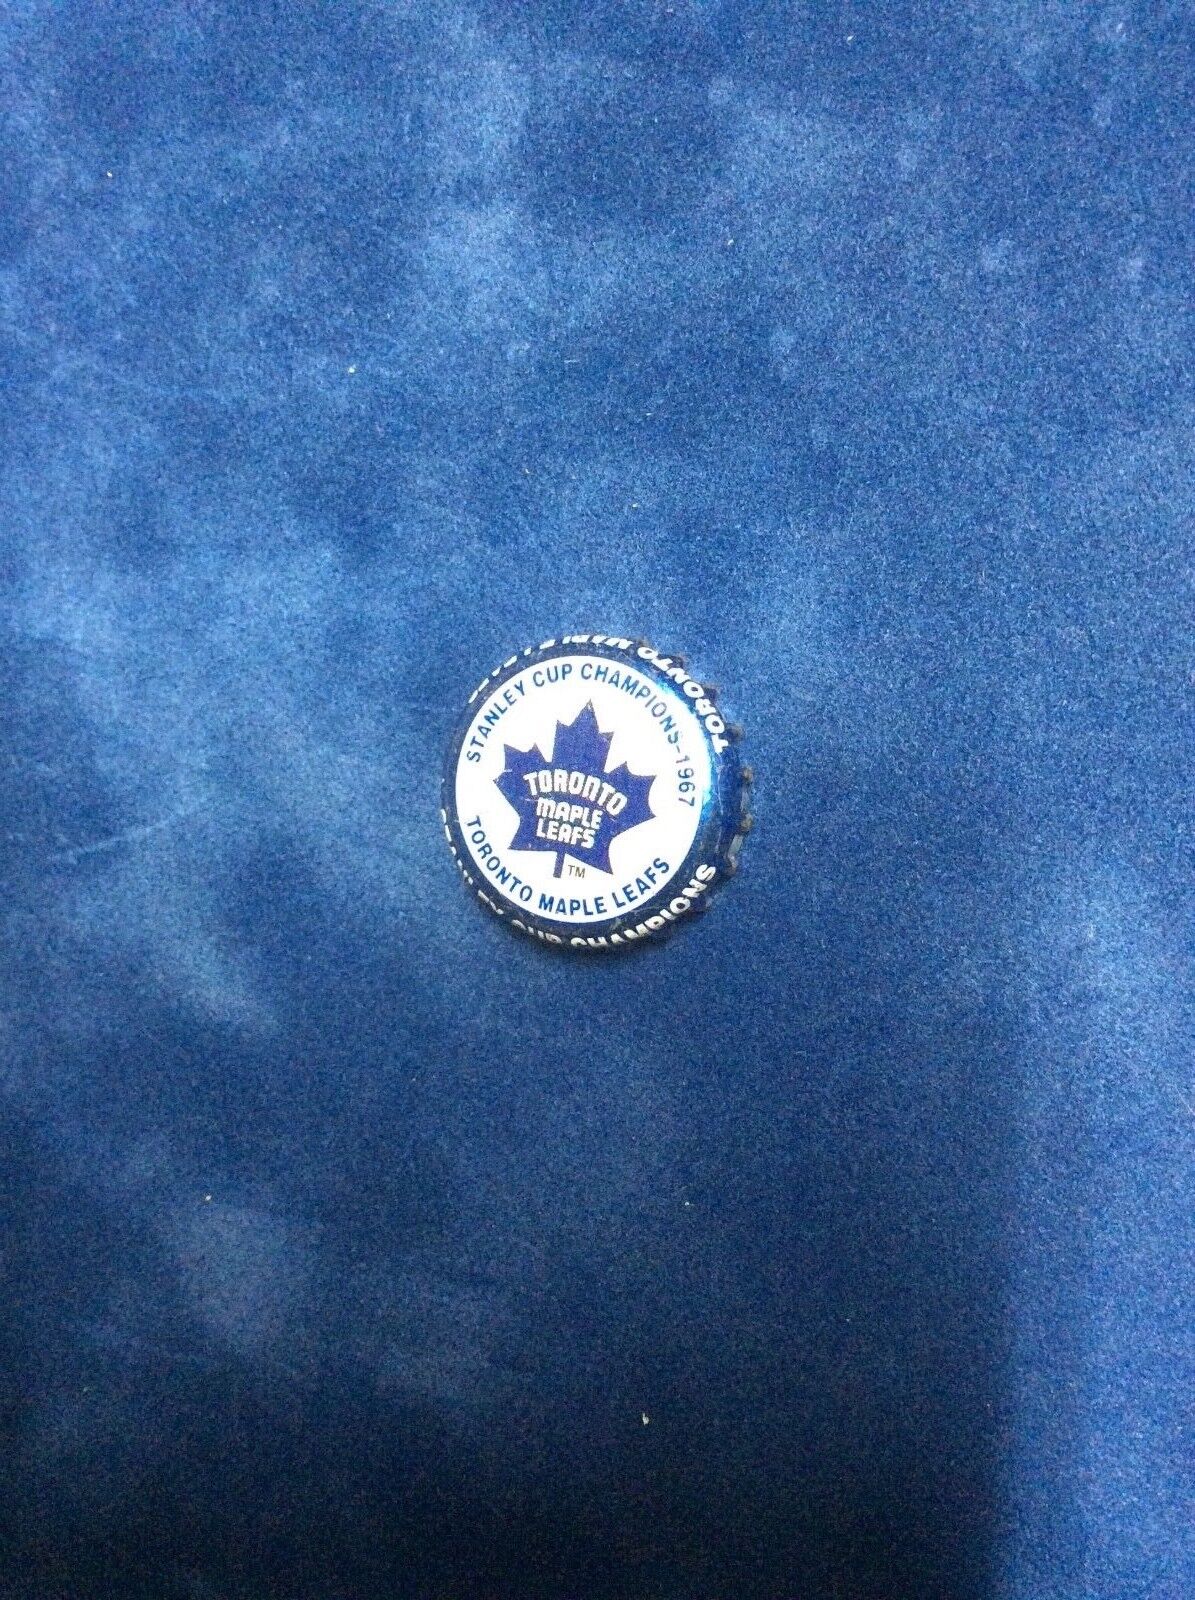 Stanley Cup Champ  Toronto MapleLeafs 1967 Limited edition  NHL Labatts Beer Cap